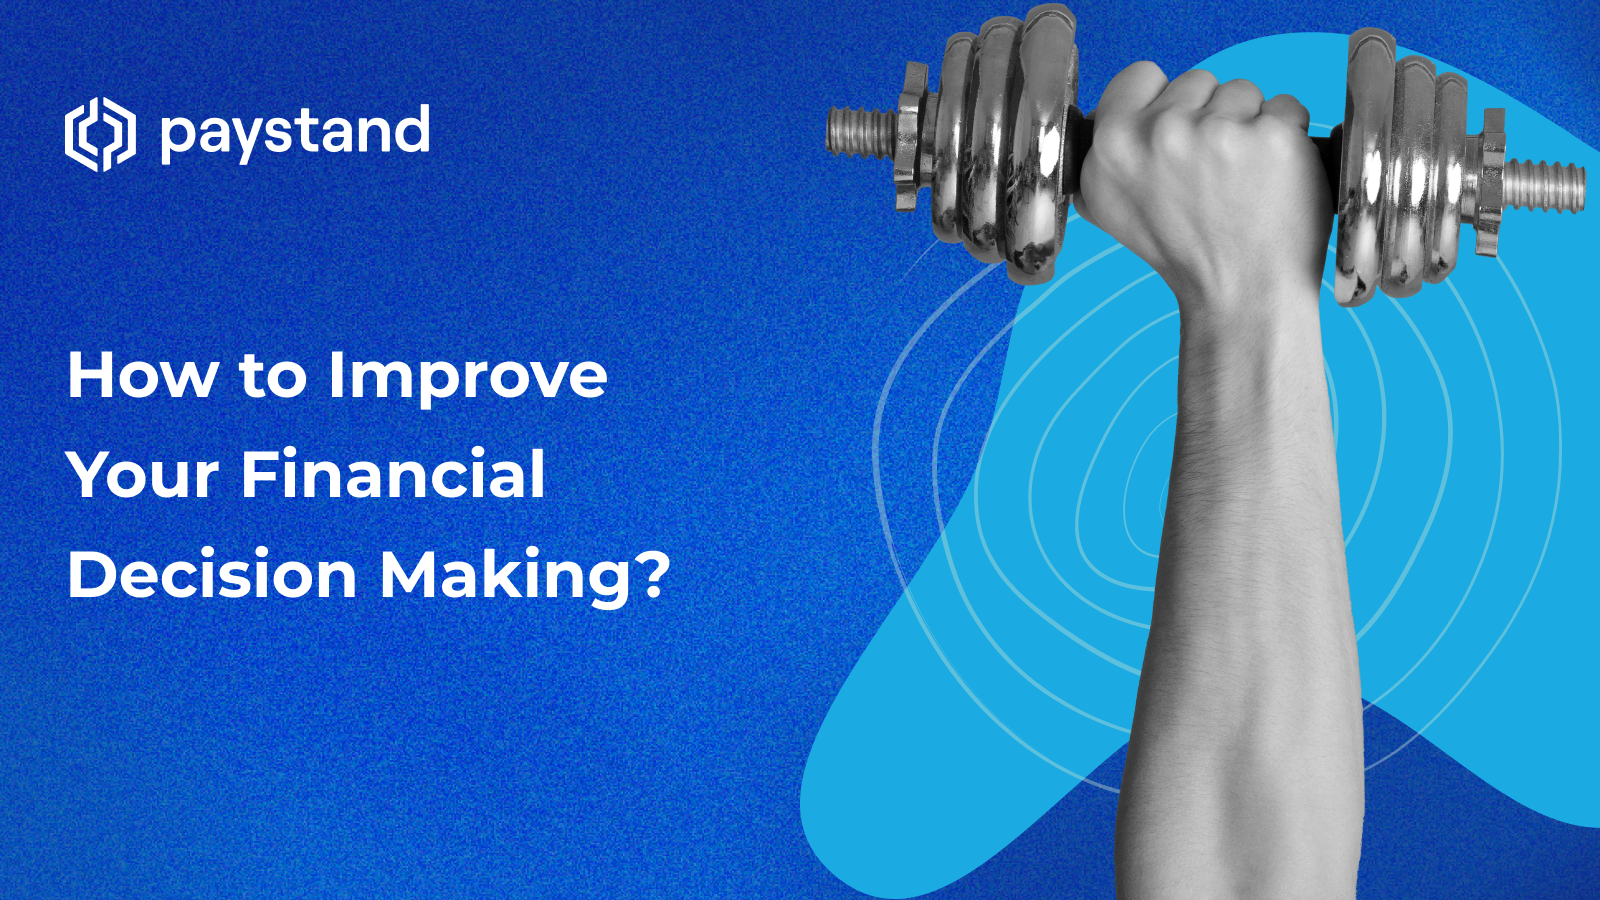 How to Improve Your Financial Decision Making?